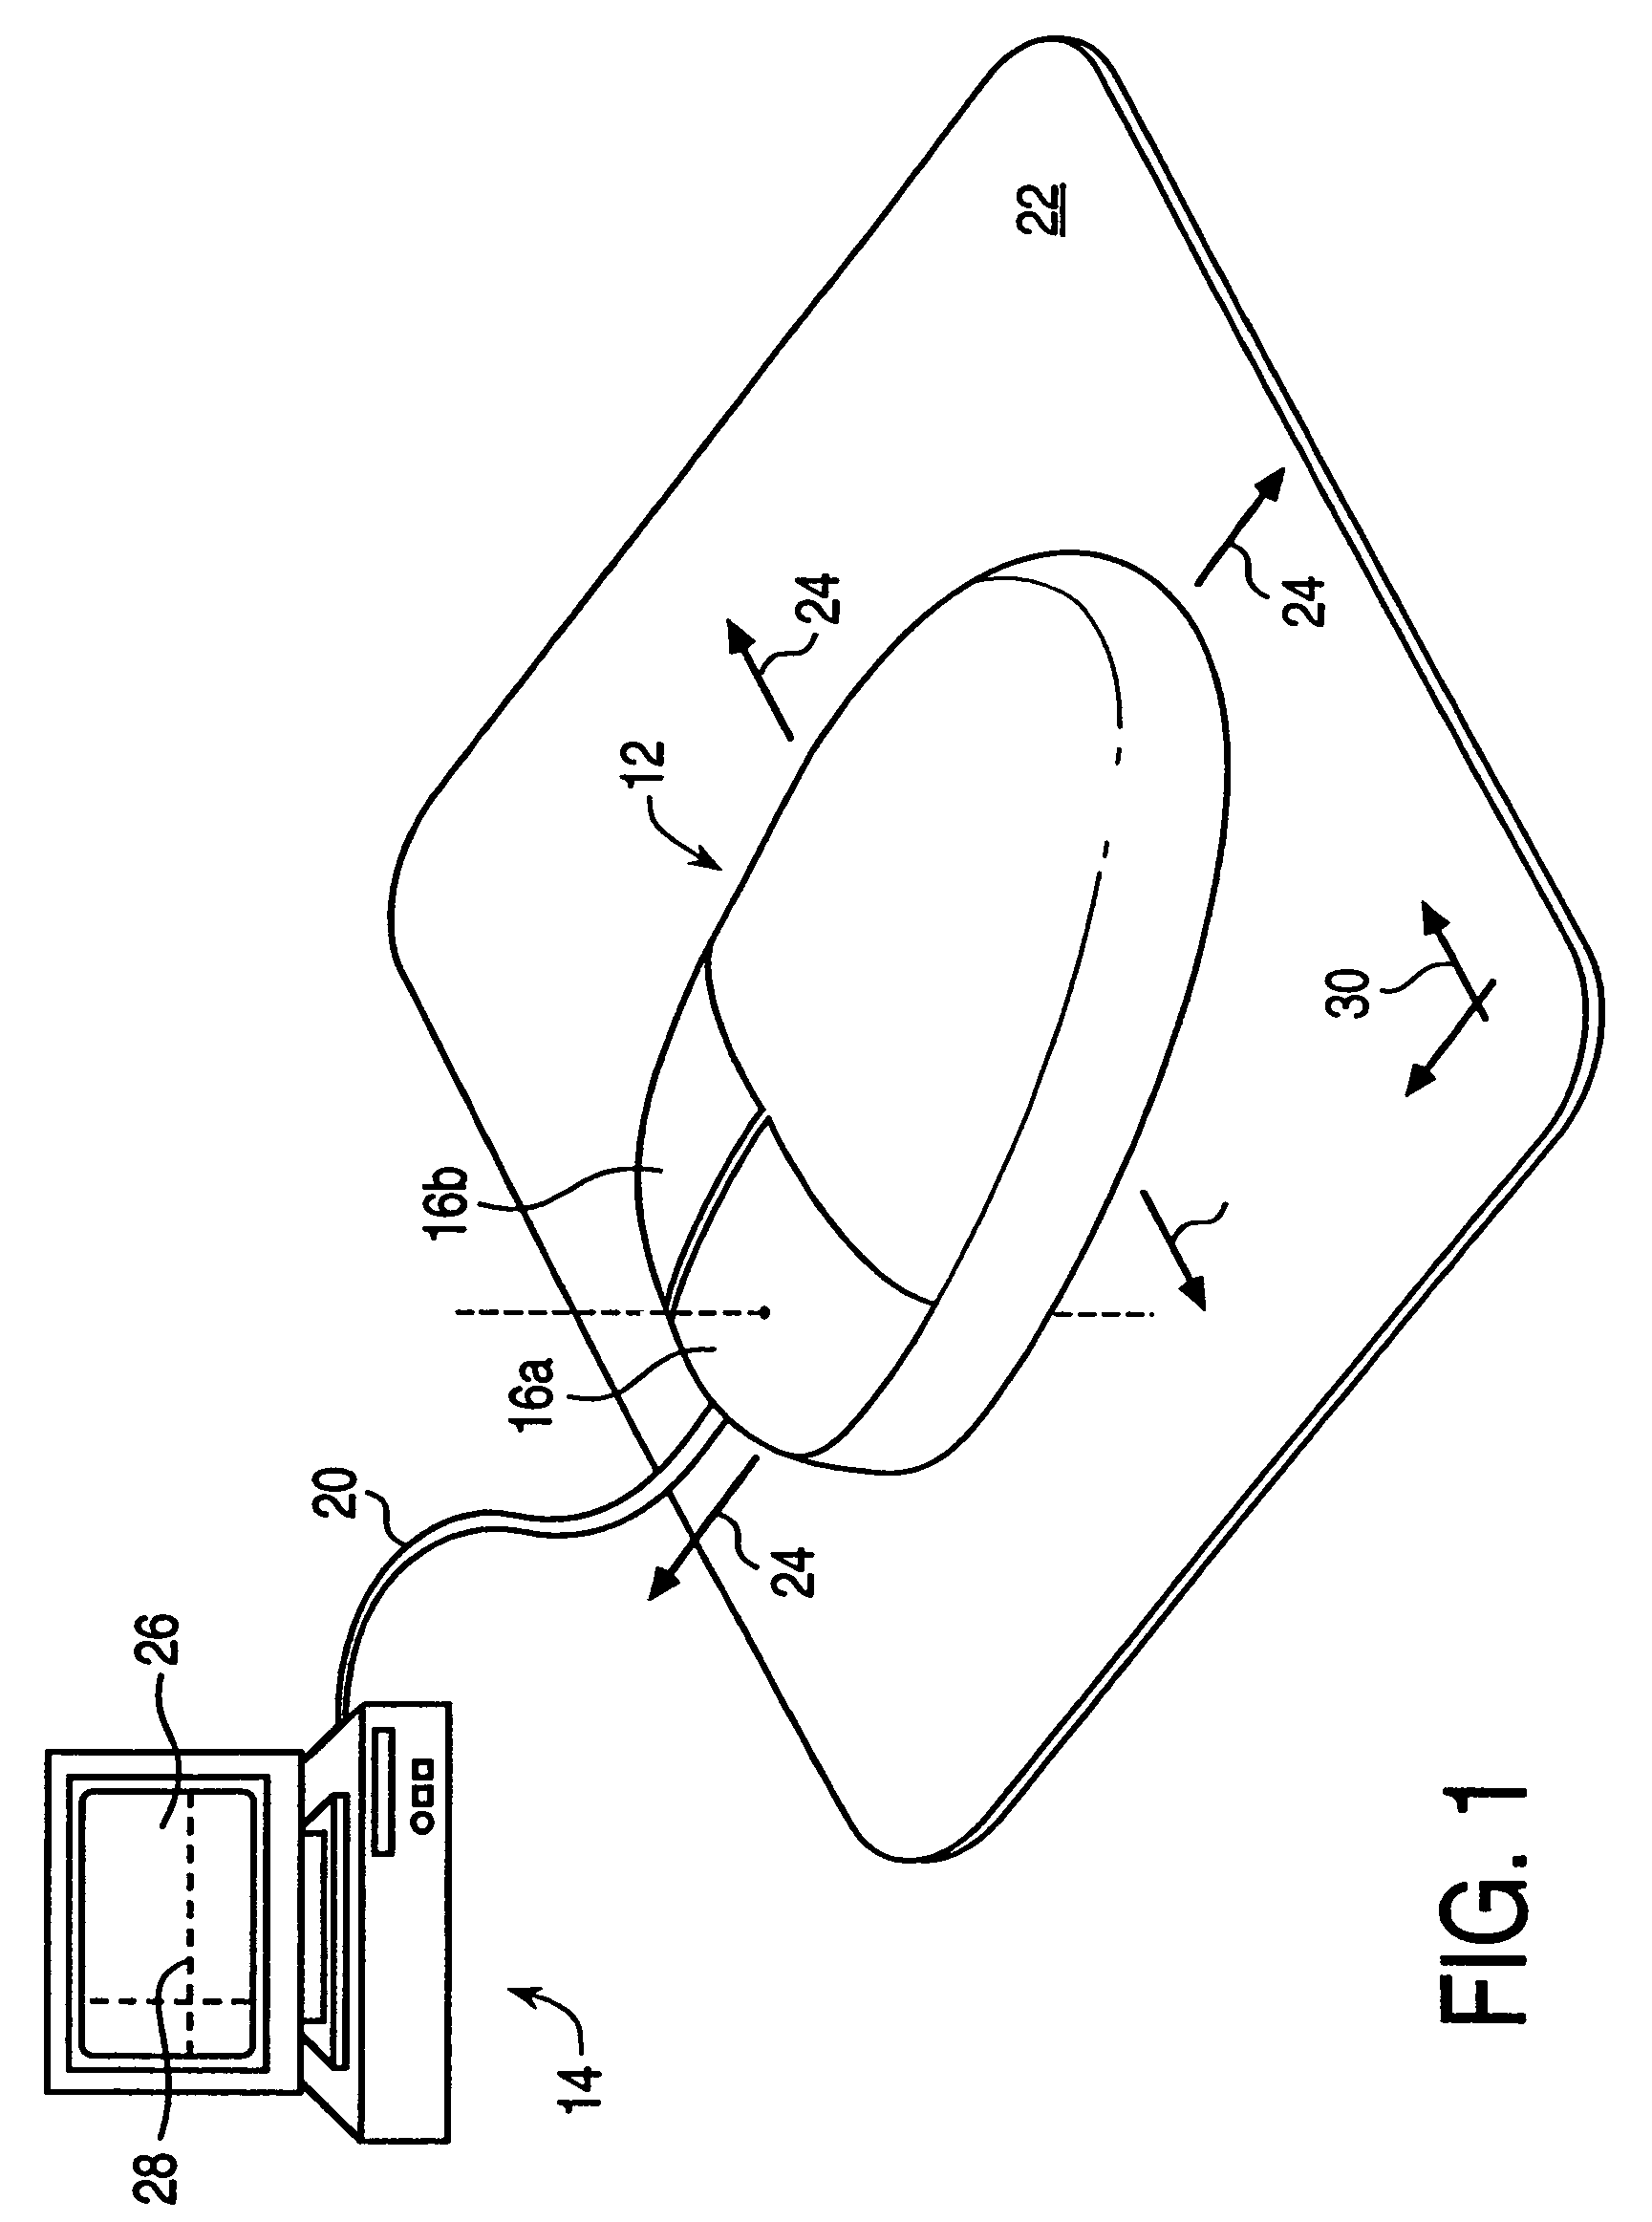 Haptic interface device and actuator assembly providing linear haptic sensations